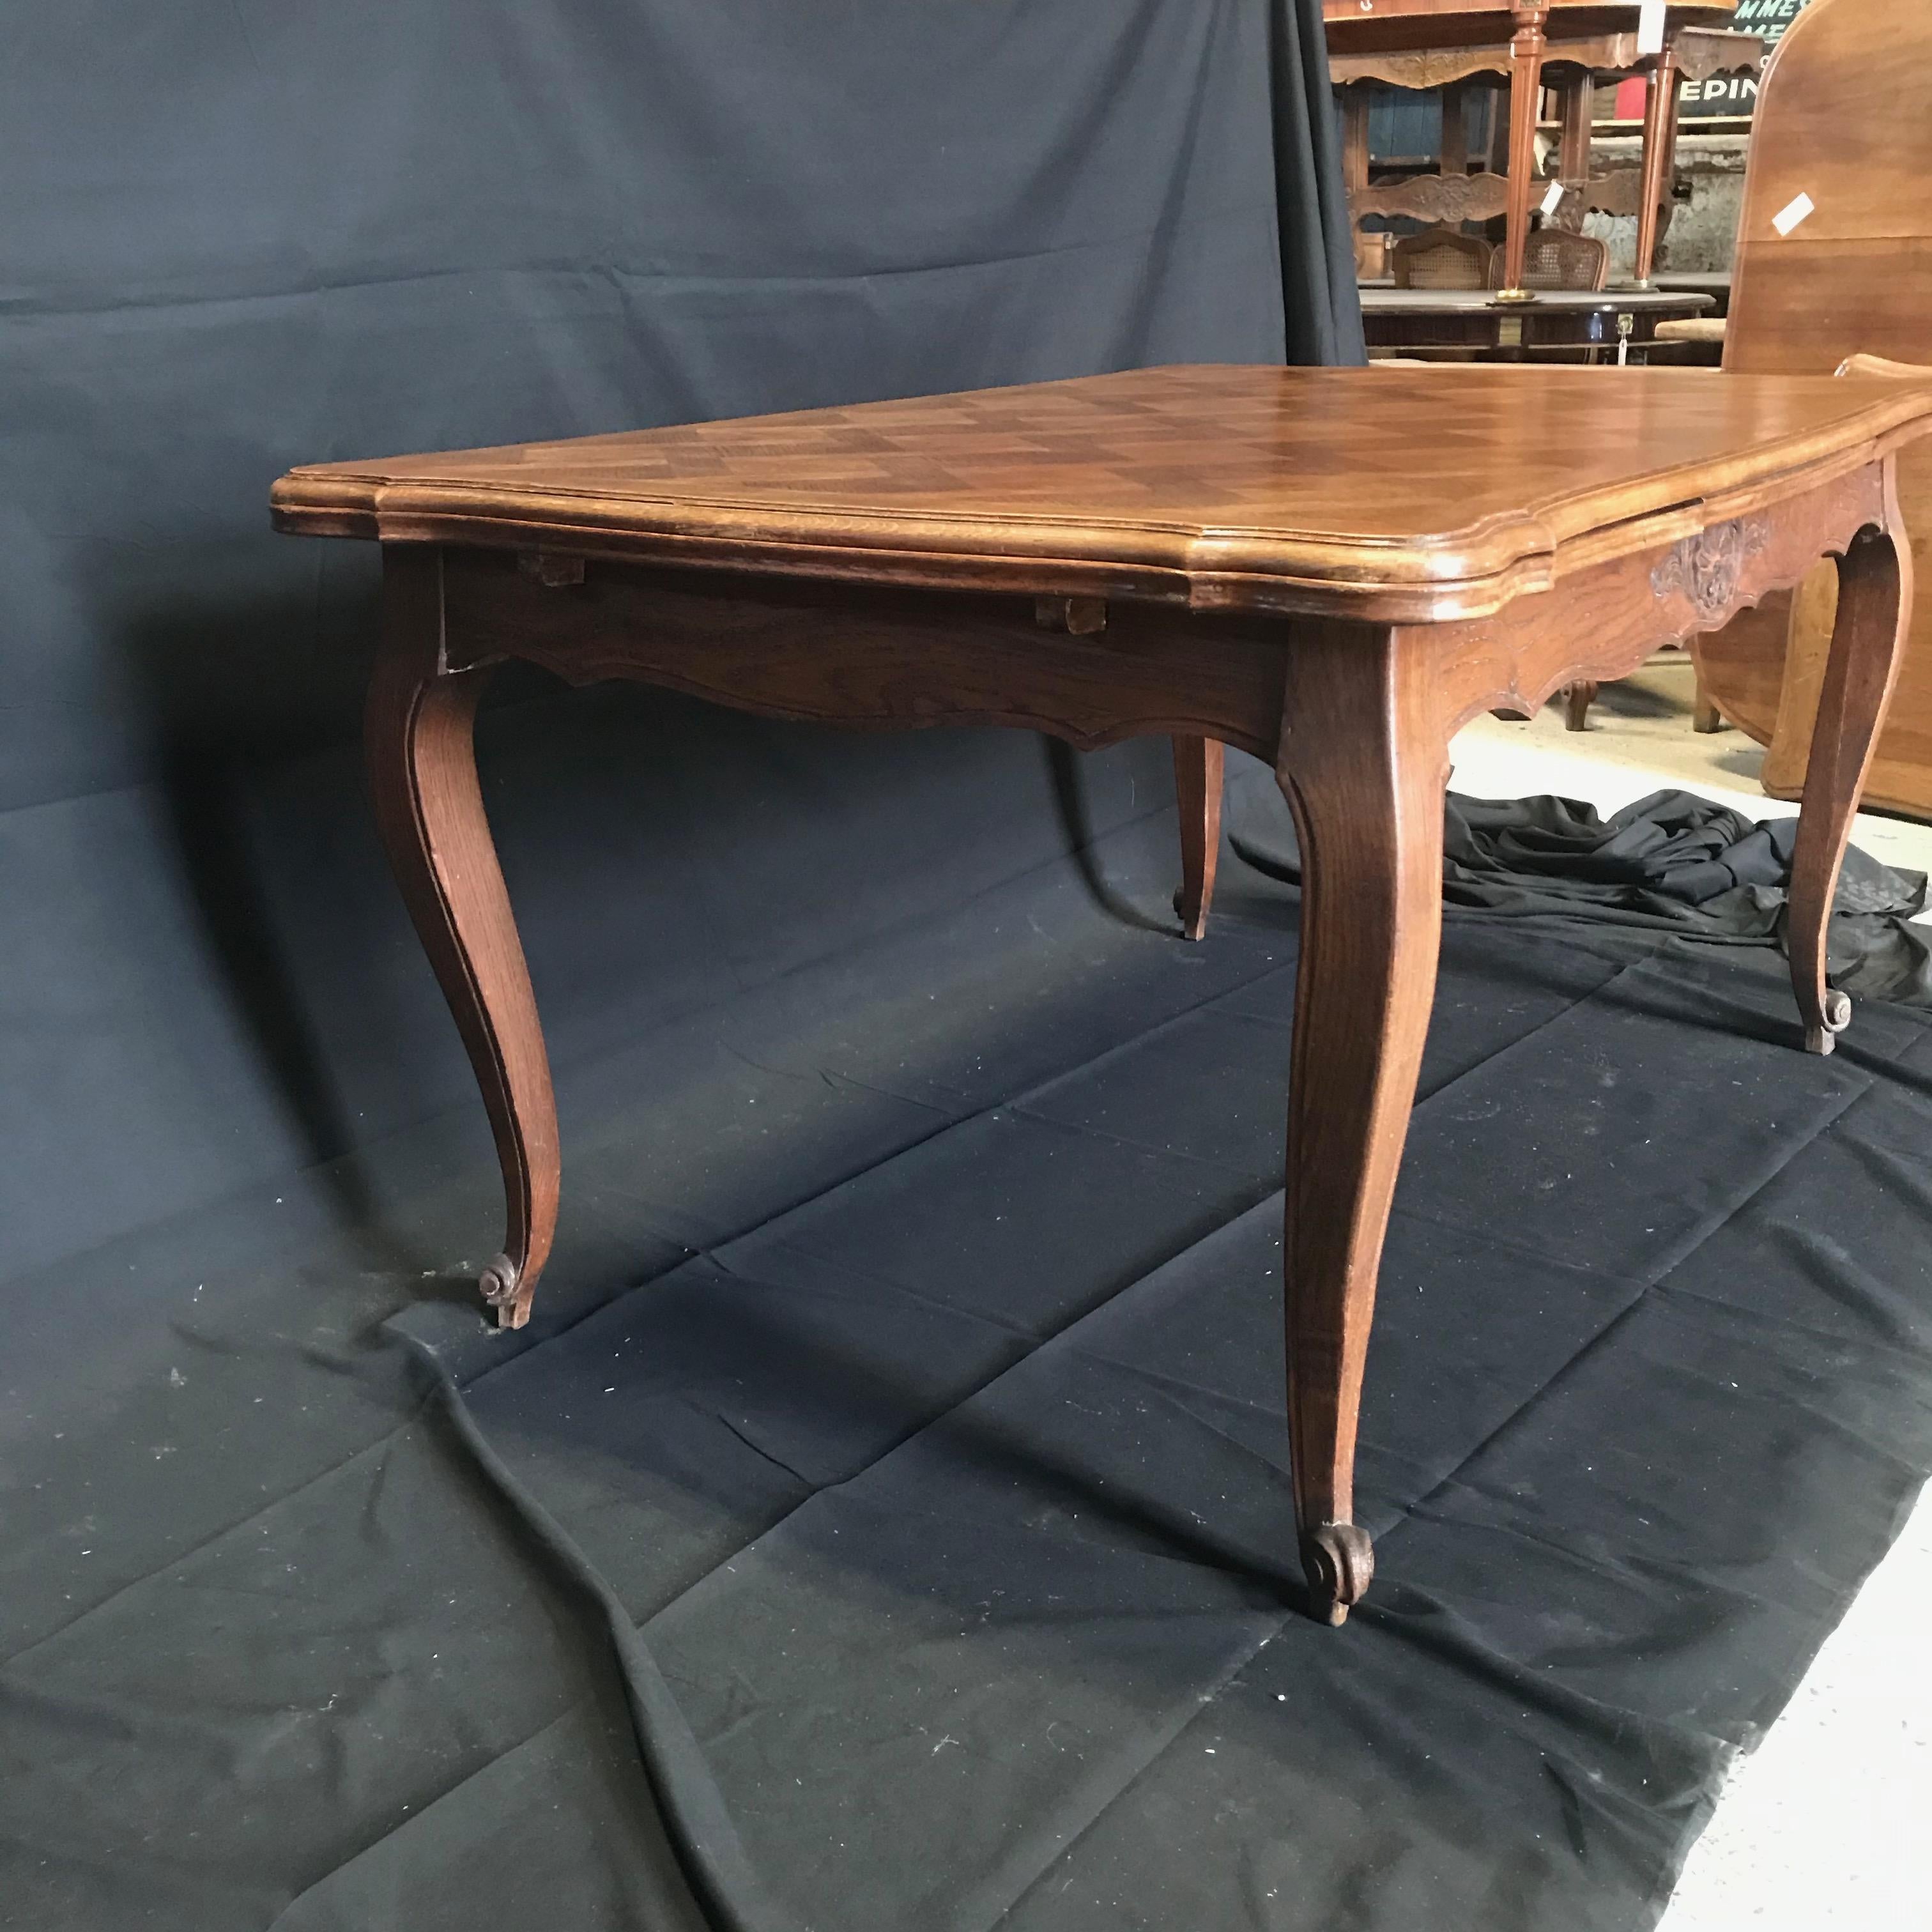 Beautifully carved French country farmhouse extension table featuring a parquetry inlay top and two inset leaves. This versatile table has carved cabriolet legs terminating in snail's head feet, with scroll and shell carvings on the apron. With